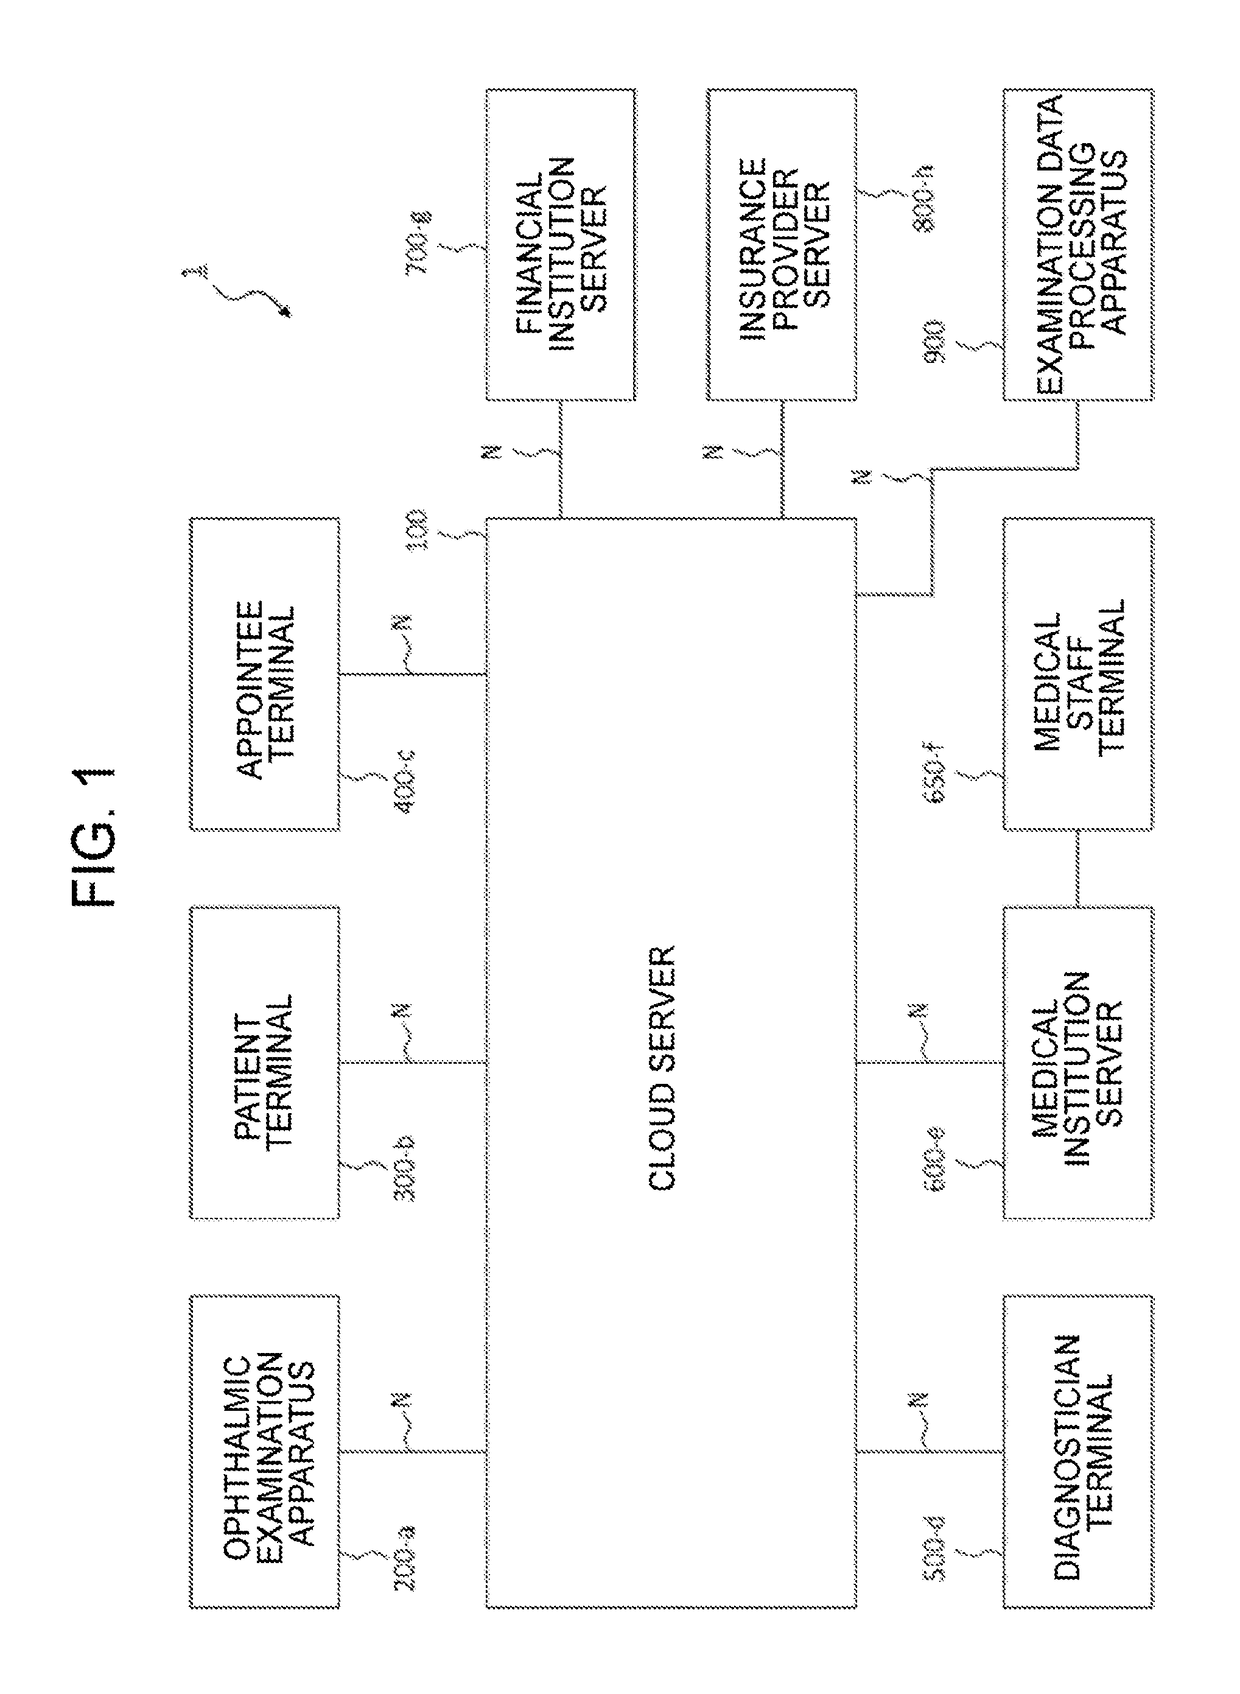 Ophthalmic information system and ophthalmic information processing server